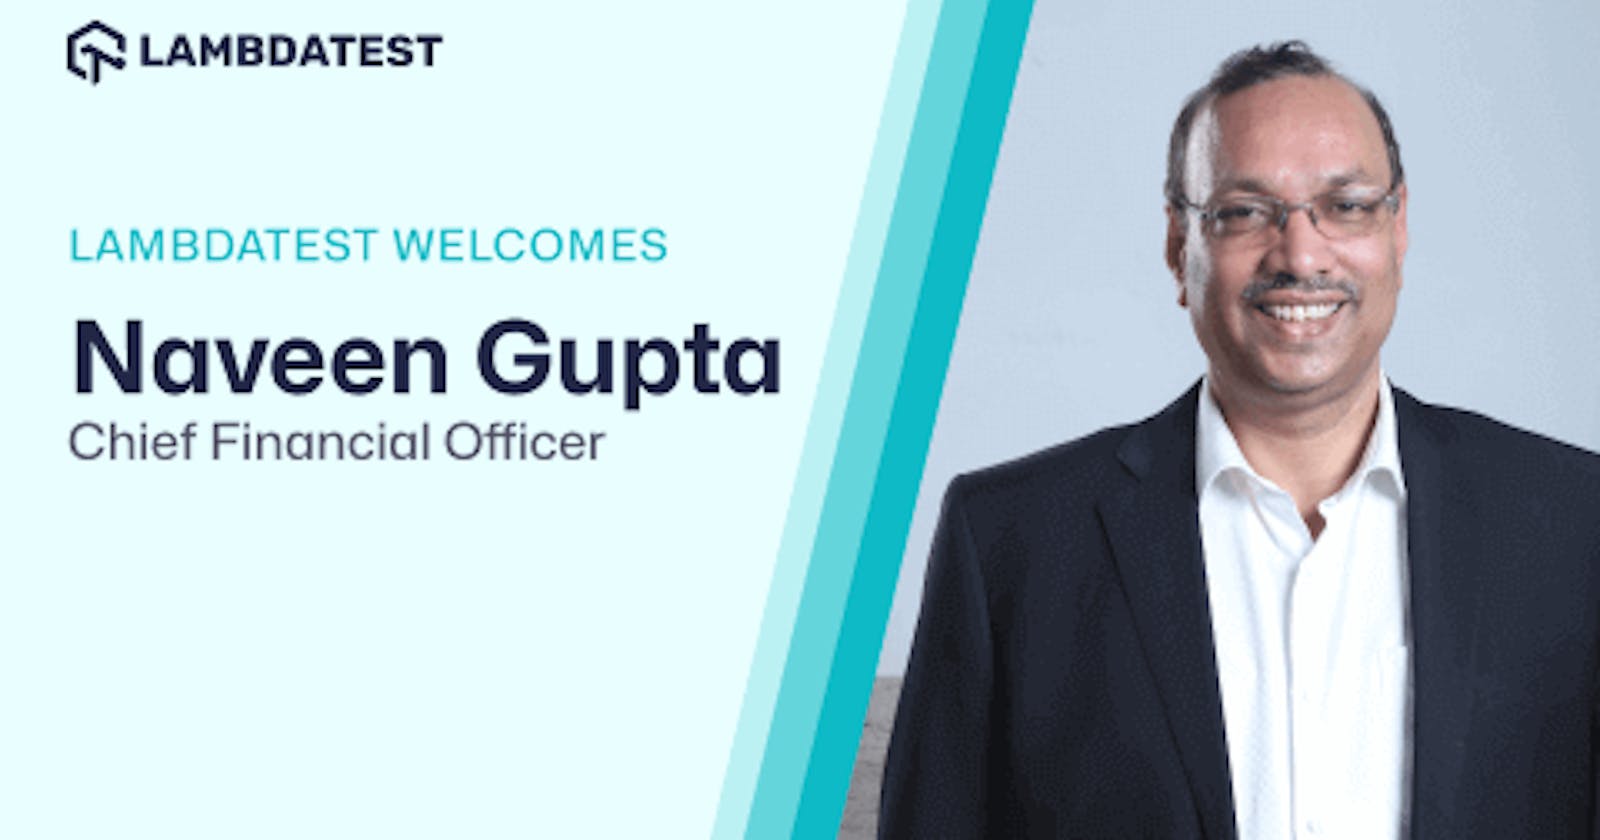 LambdaTest welcomes Naveen Gupta as Chief Financial Officer